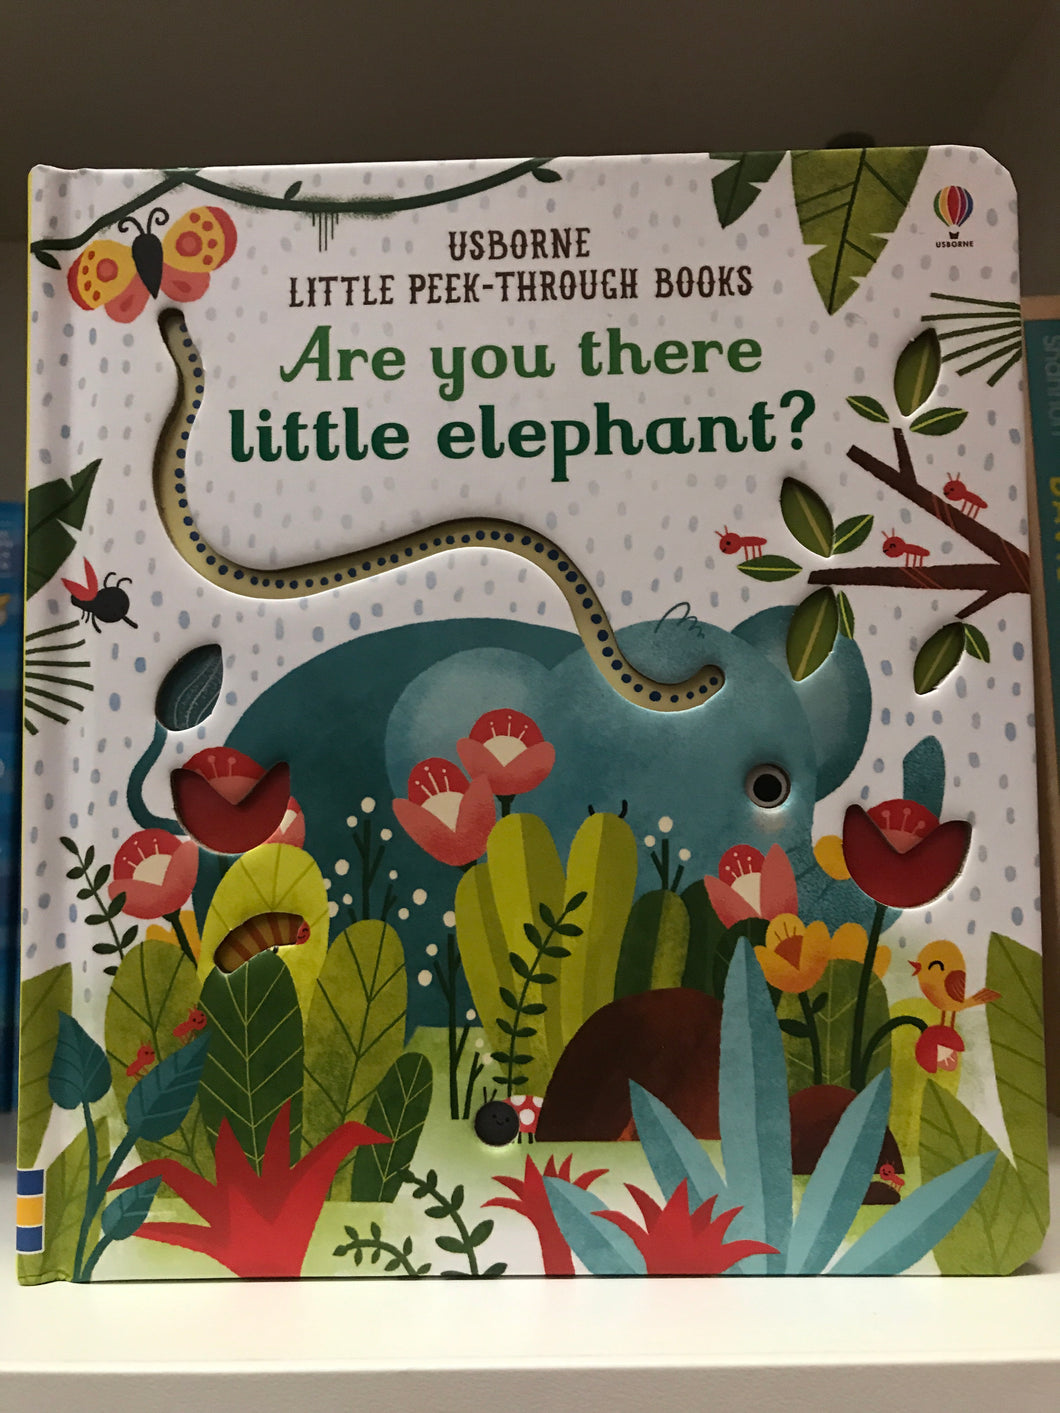 ARE YOU THERE LITTLE ELEPHANT? - Peek Through Book(Usborne)